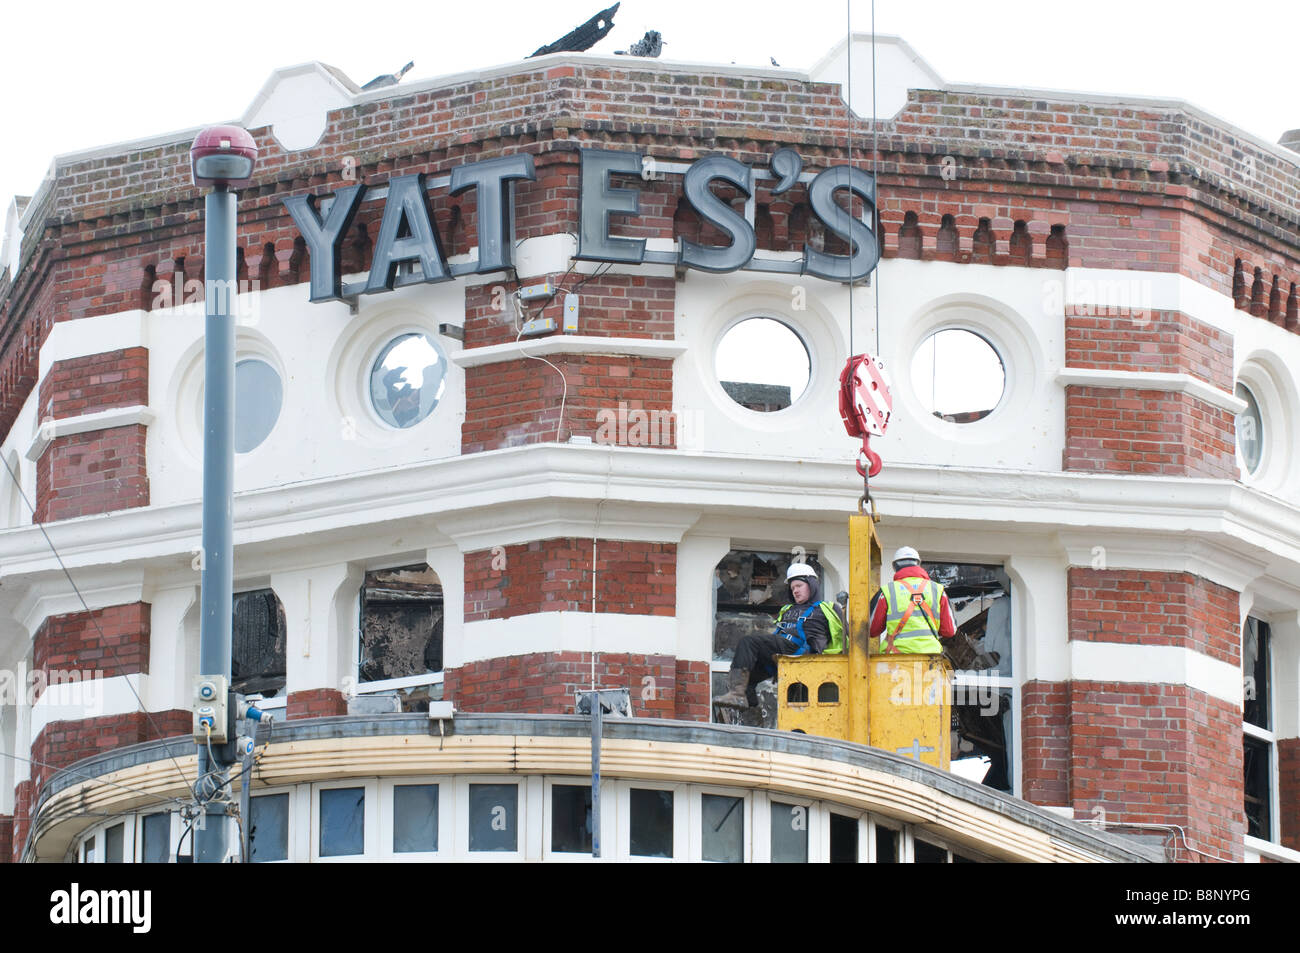 Two construction workers examine the fire damage to Yates's Wine Lodge in Blackpool, England Stock Photo